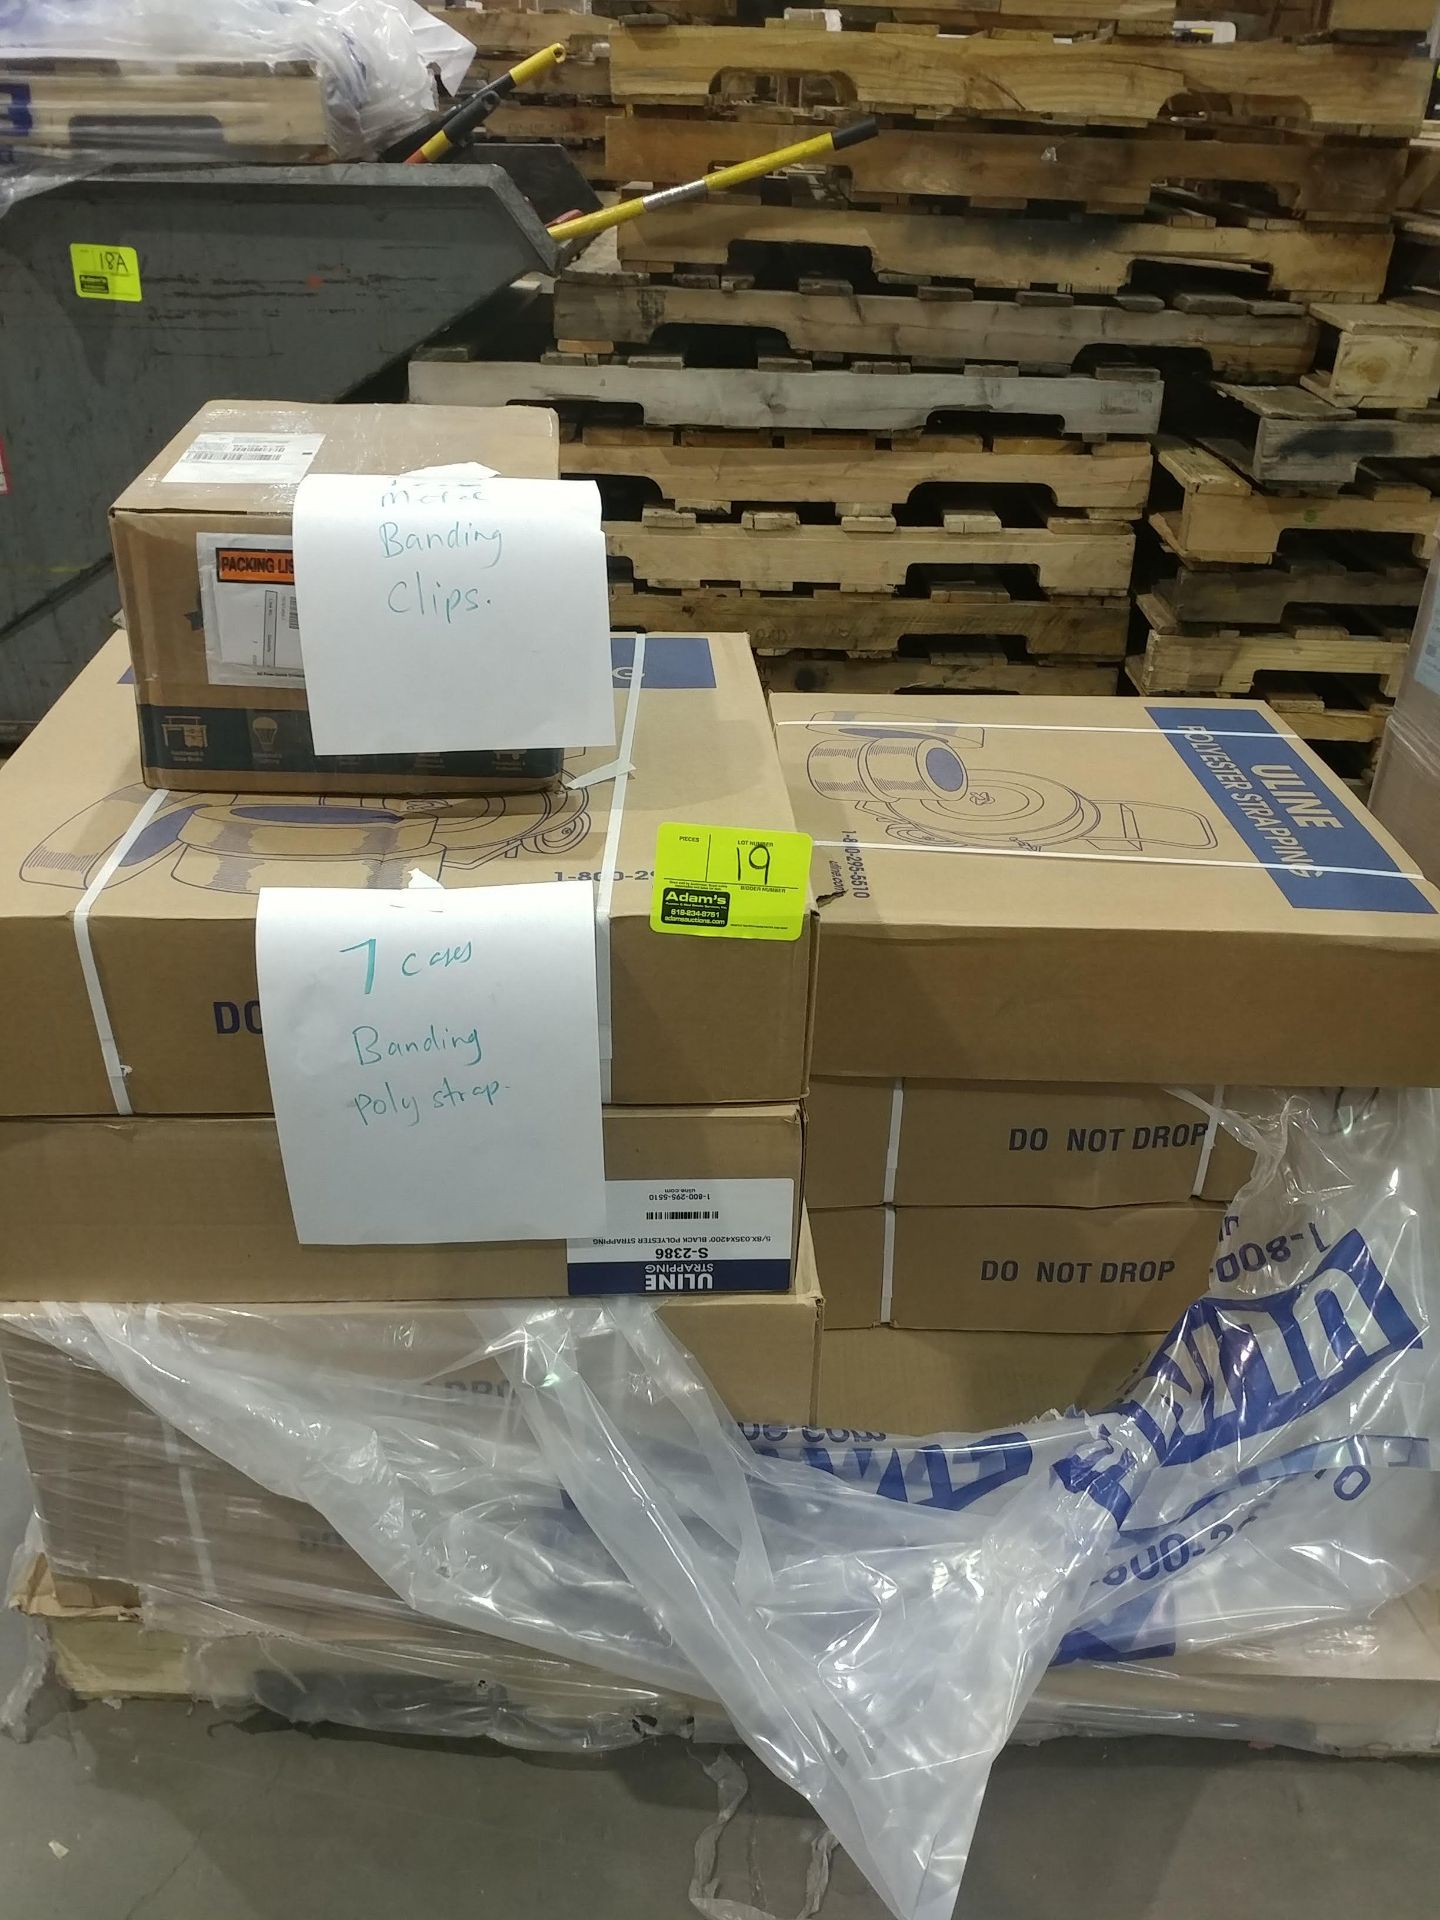 (7) cases of banding poly strap and (1) case of metal clips